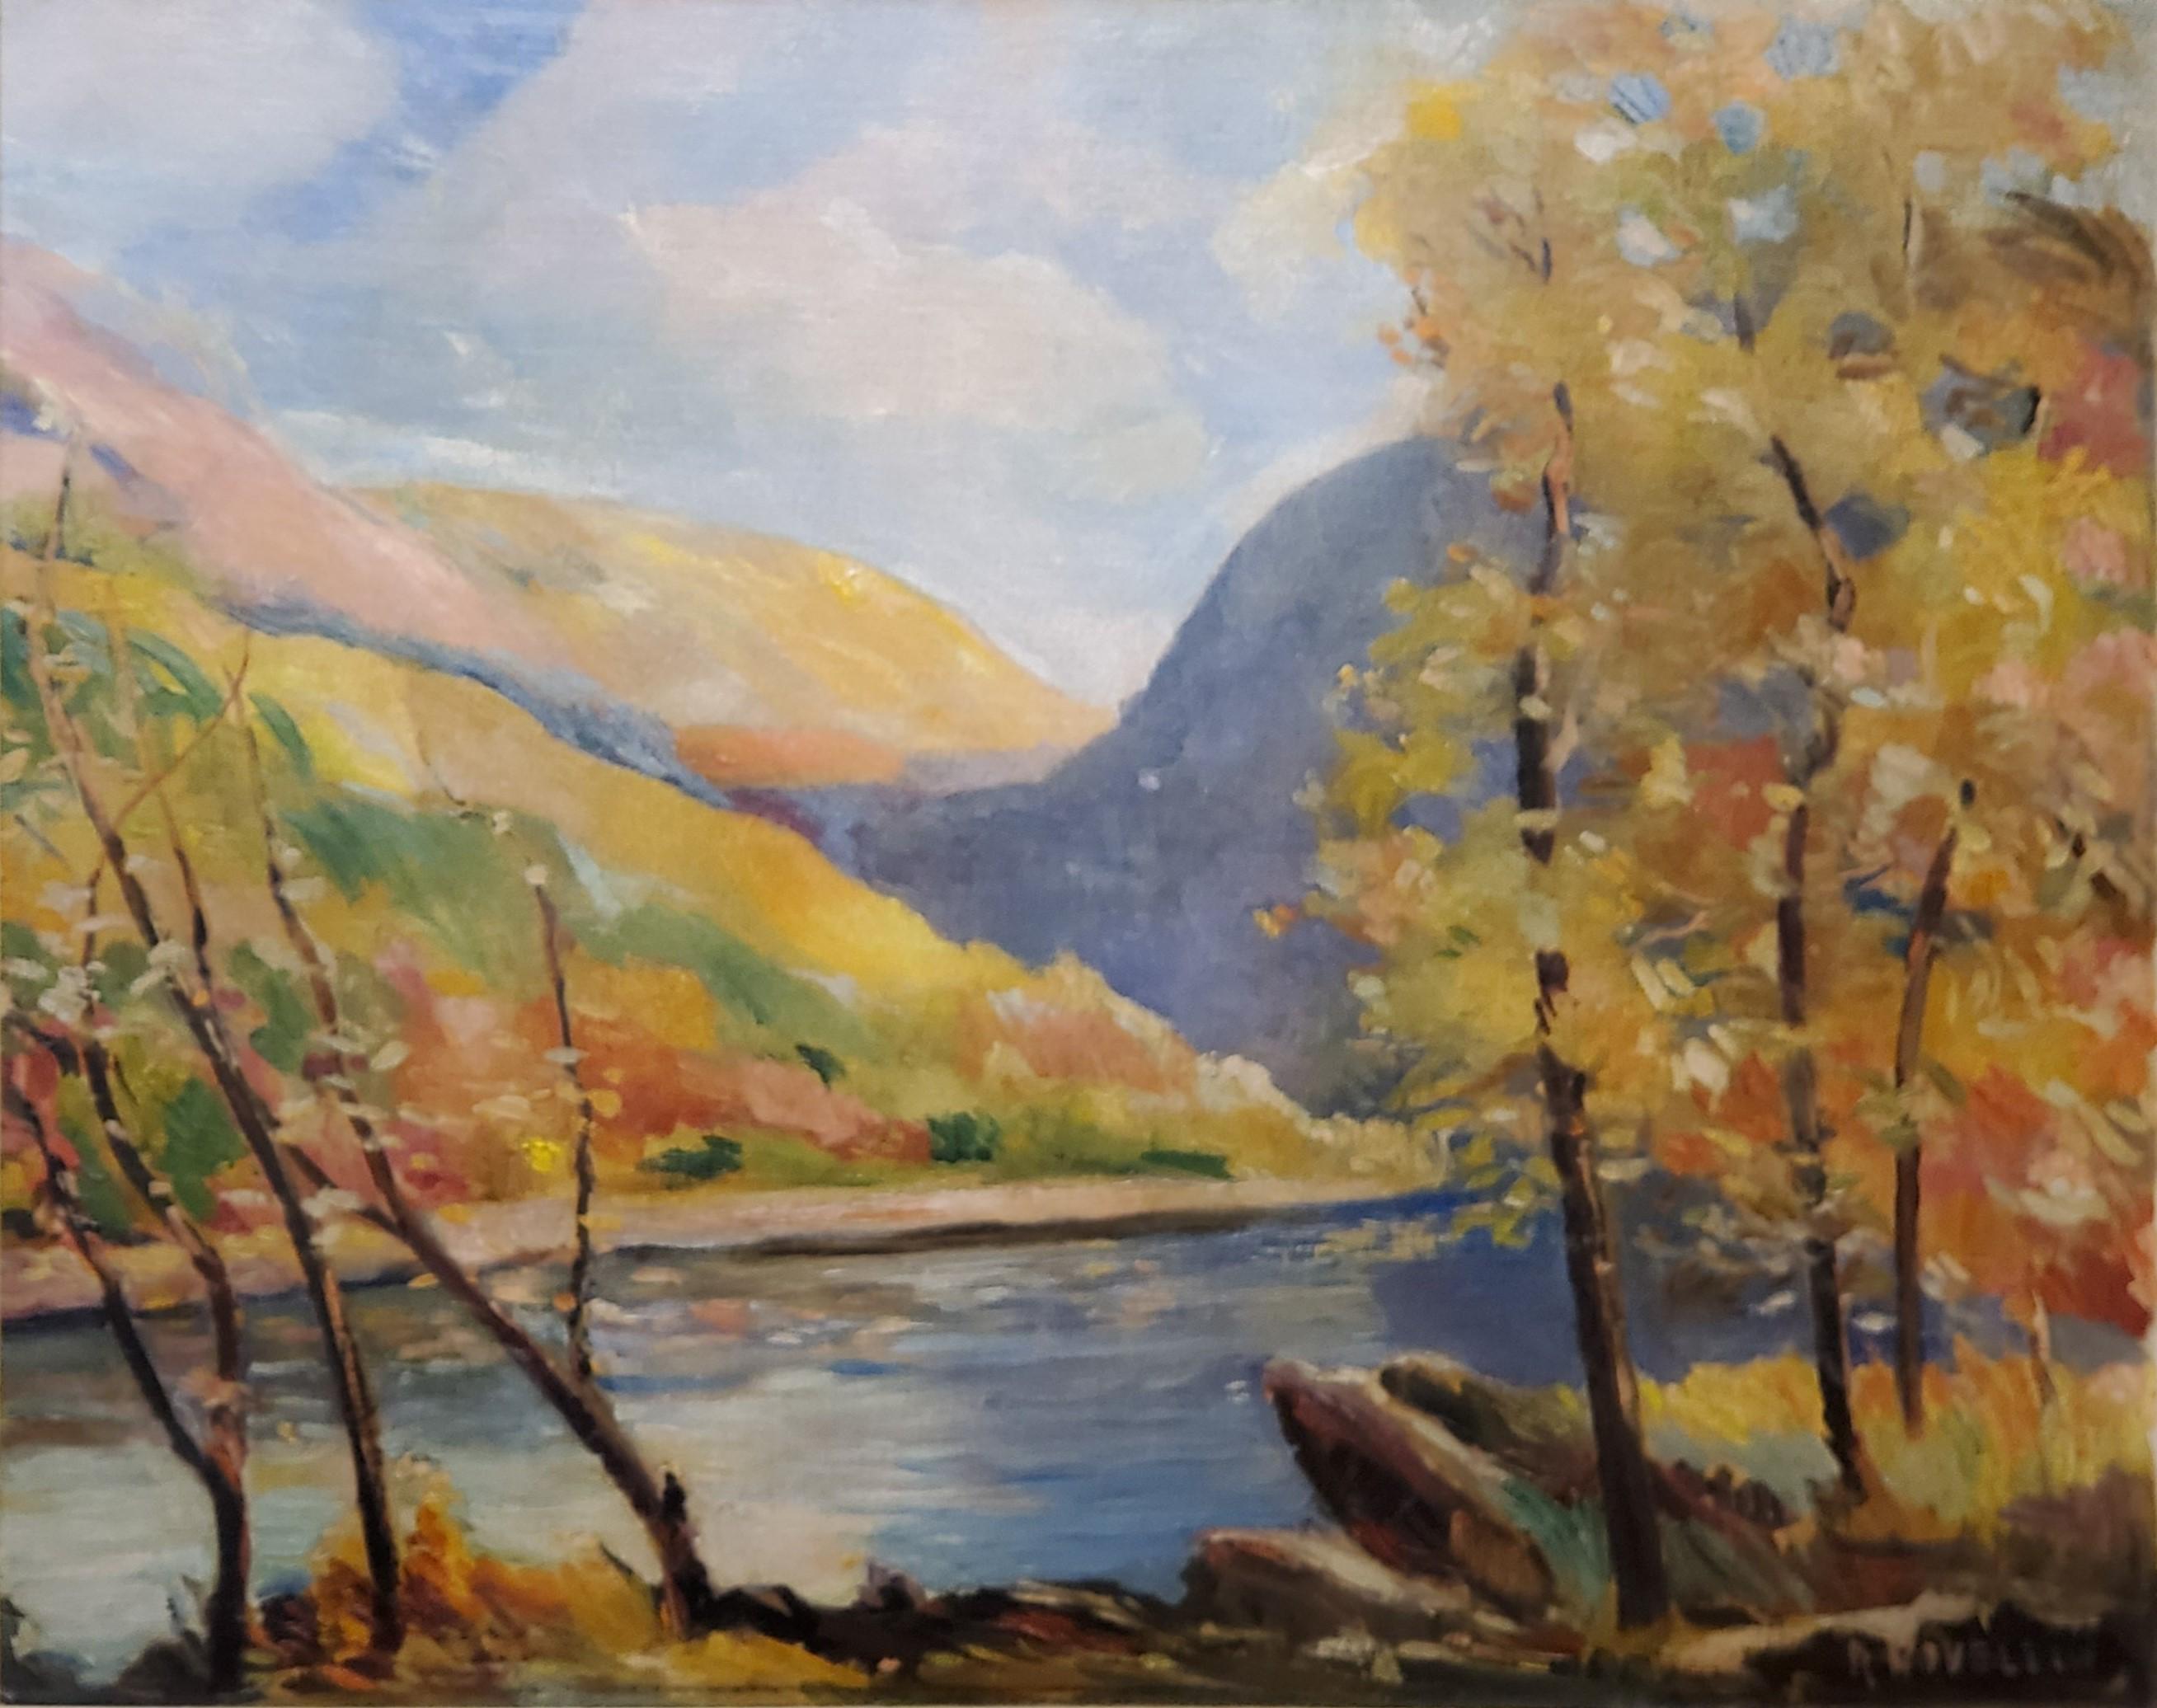 Impressionist Landscape View of the Delaware River Valley In Autumn - Painting by Rudolpho Novelli